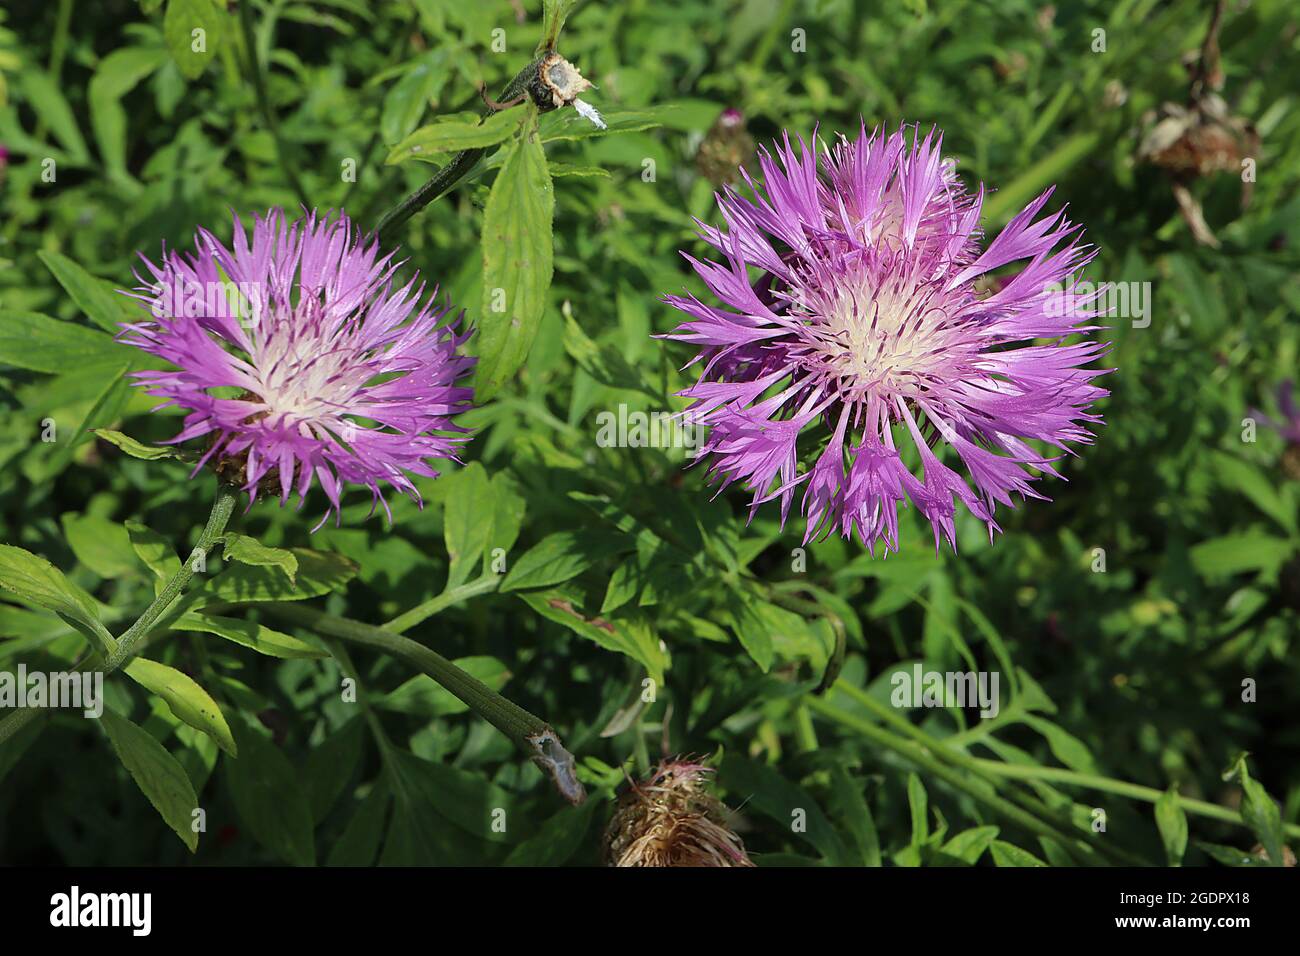 Centaurea hypoleuca ‘John Coutts’ knapweed John Coutts – flower head ring of violet flowers with white centre and purple-tipped stamens,  July, UK Stock Photo